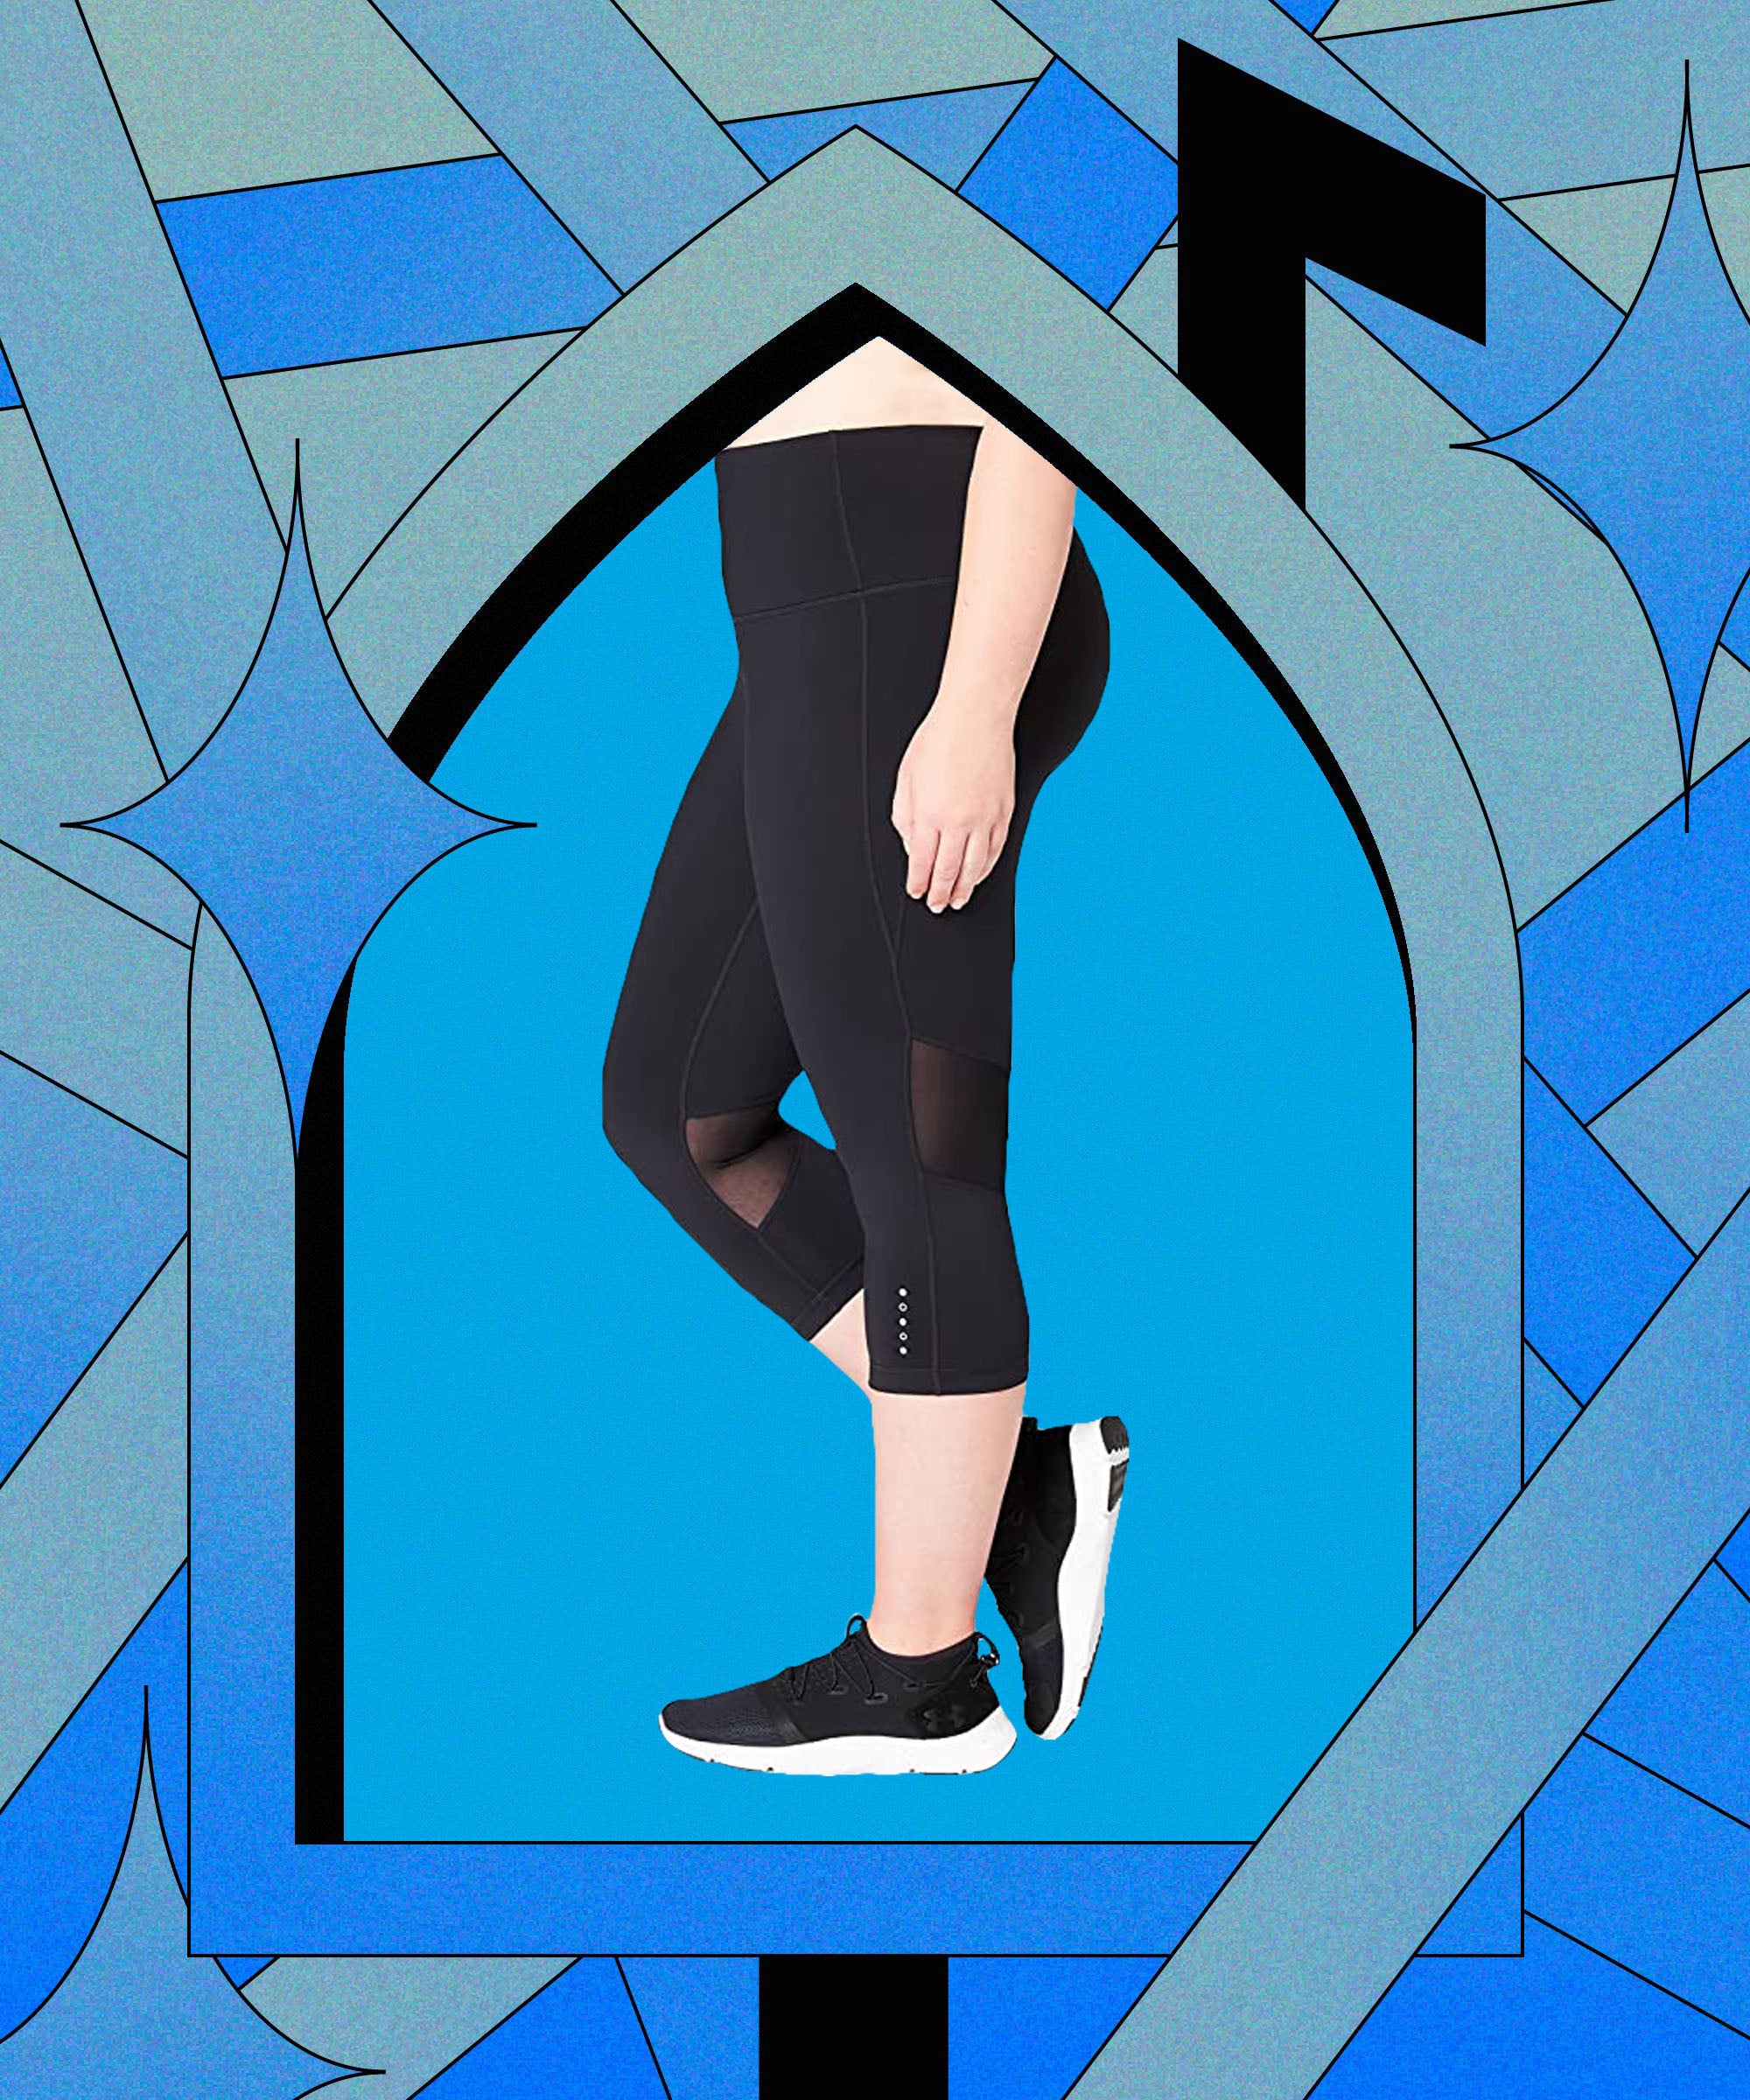 2 PACK Heathyoga / alo Yoga Leggings Pants for Women with Pockets High  Waisted